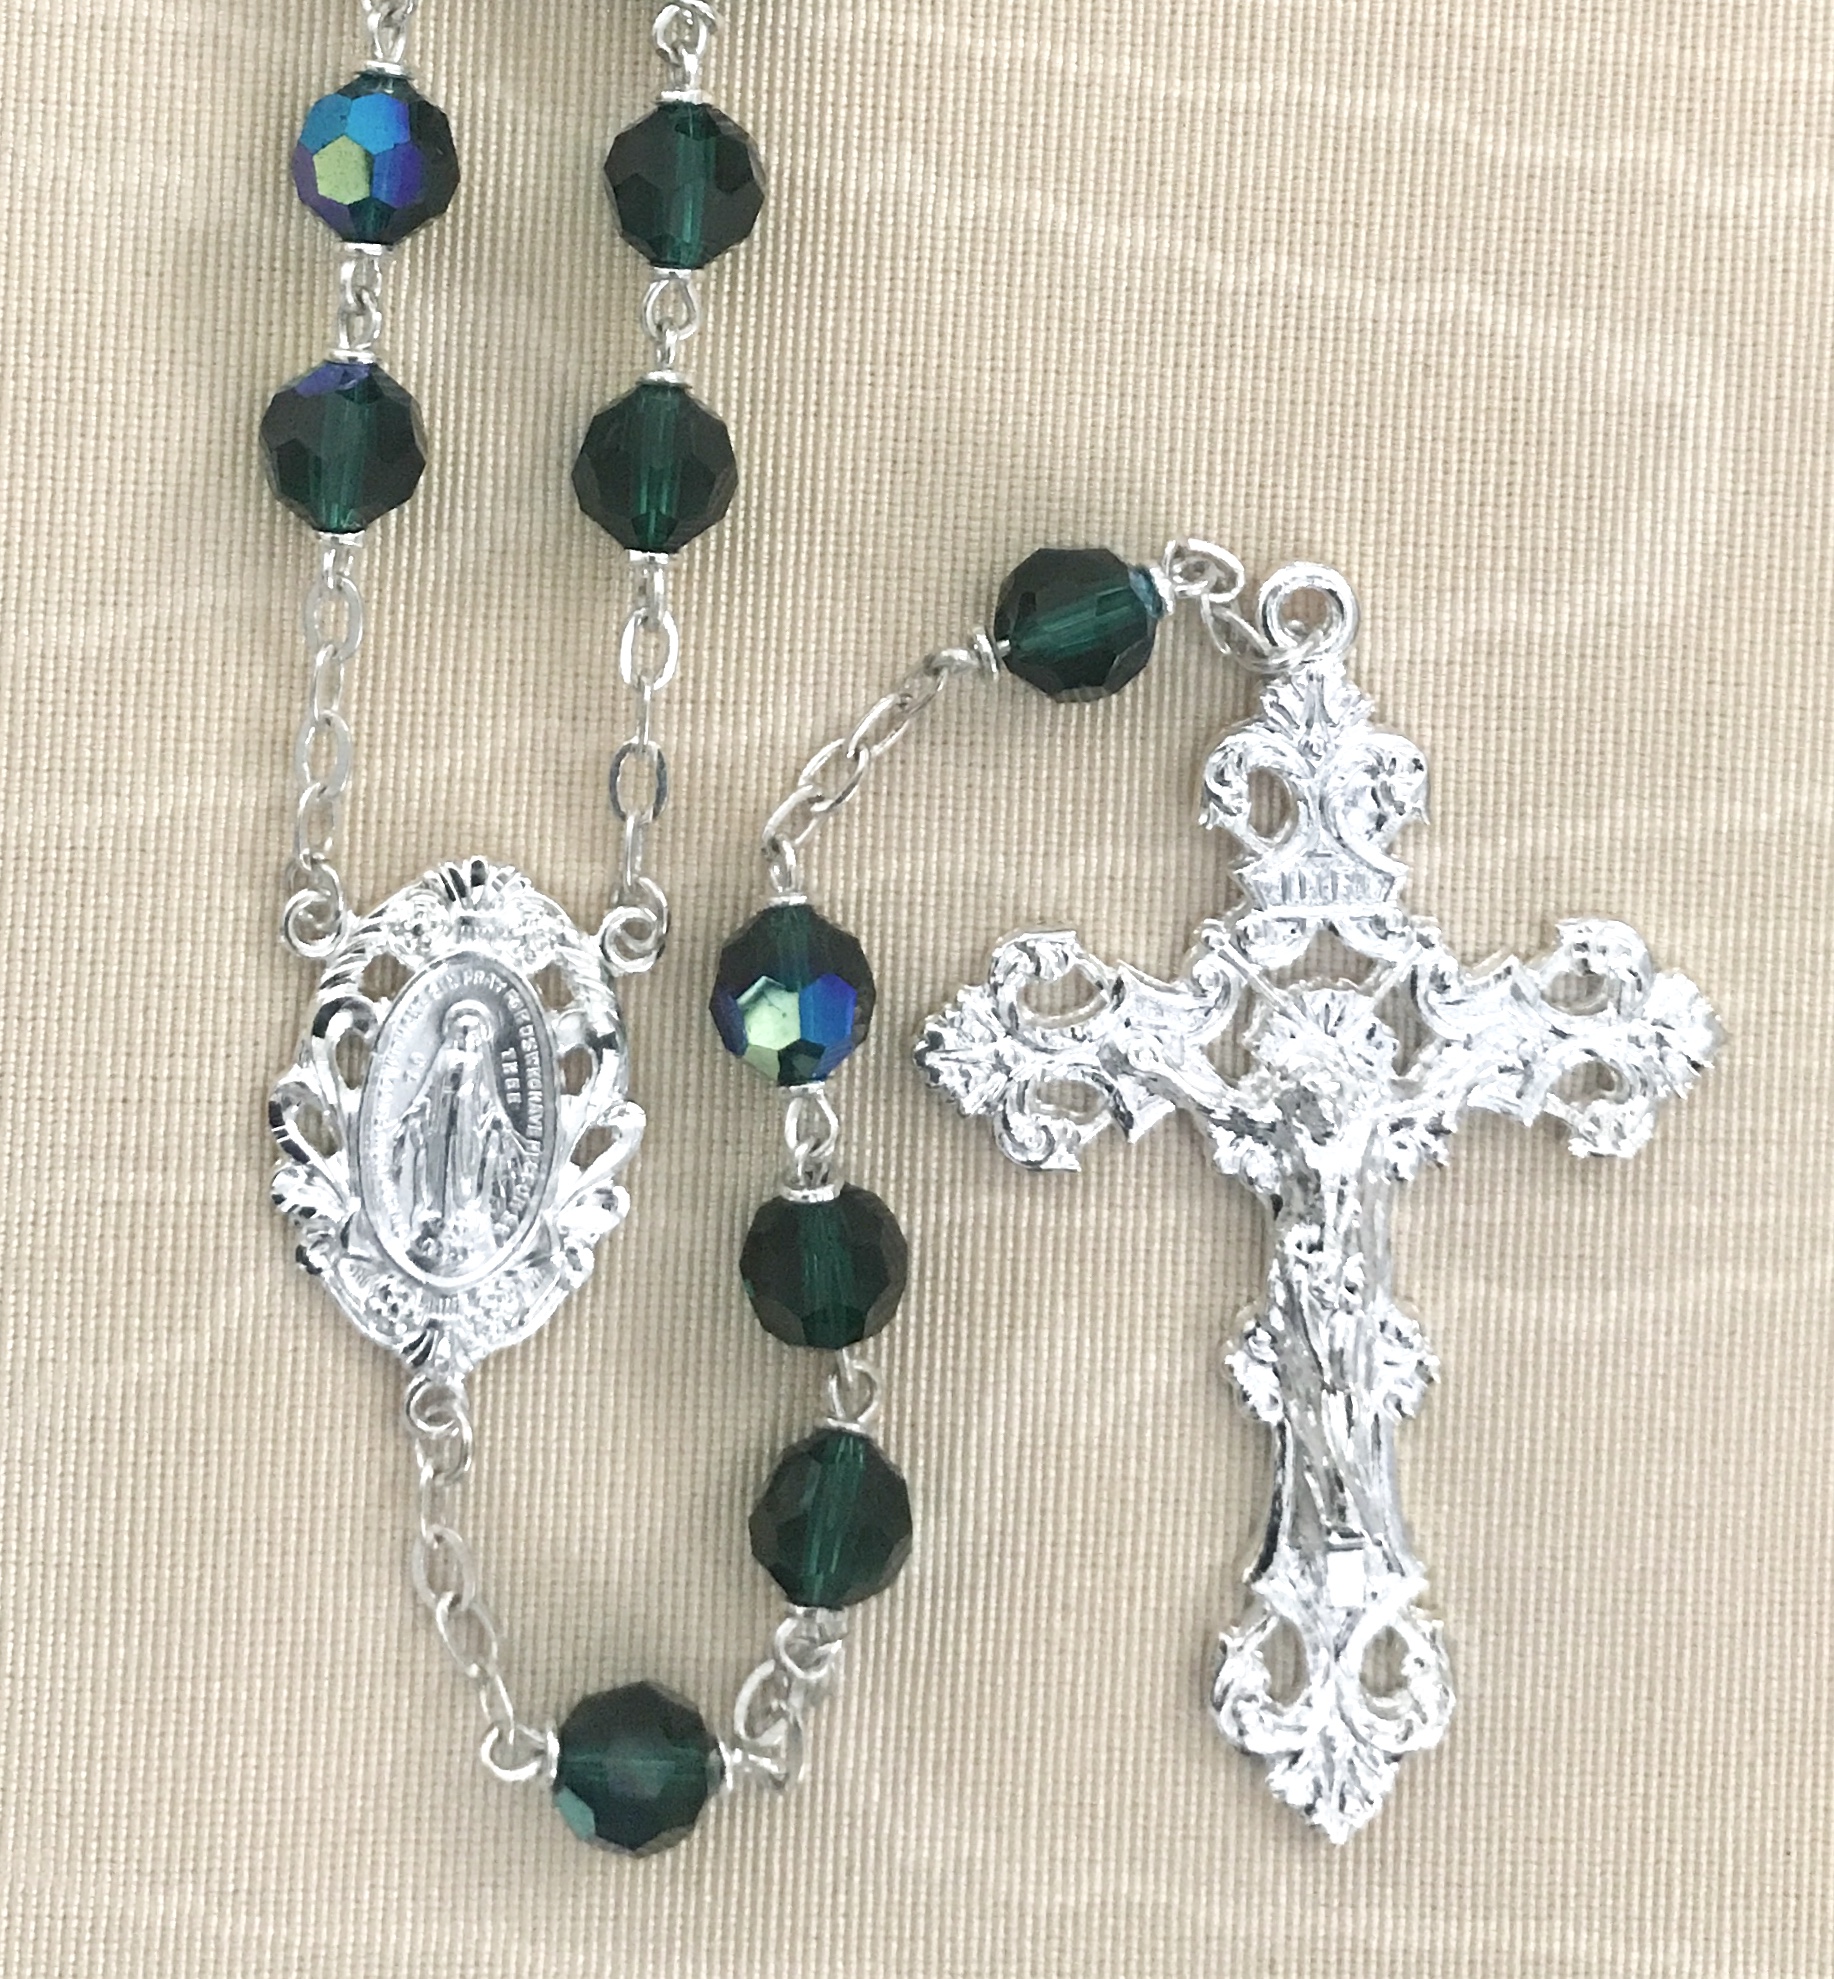 7mm ROUND EMERALD AB ROSARY WITH STERLING SILVER PLATED CENTER & CRUCIFIX GIFT BOXED